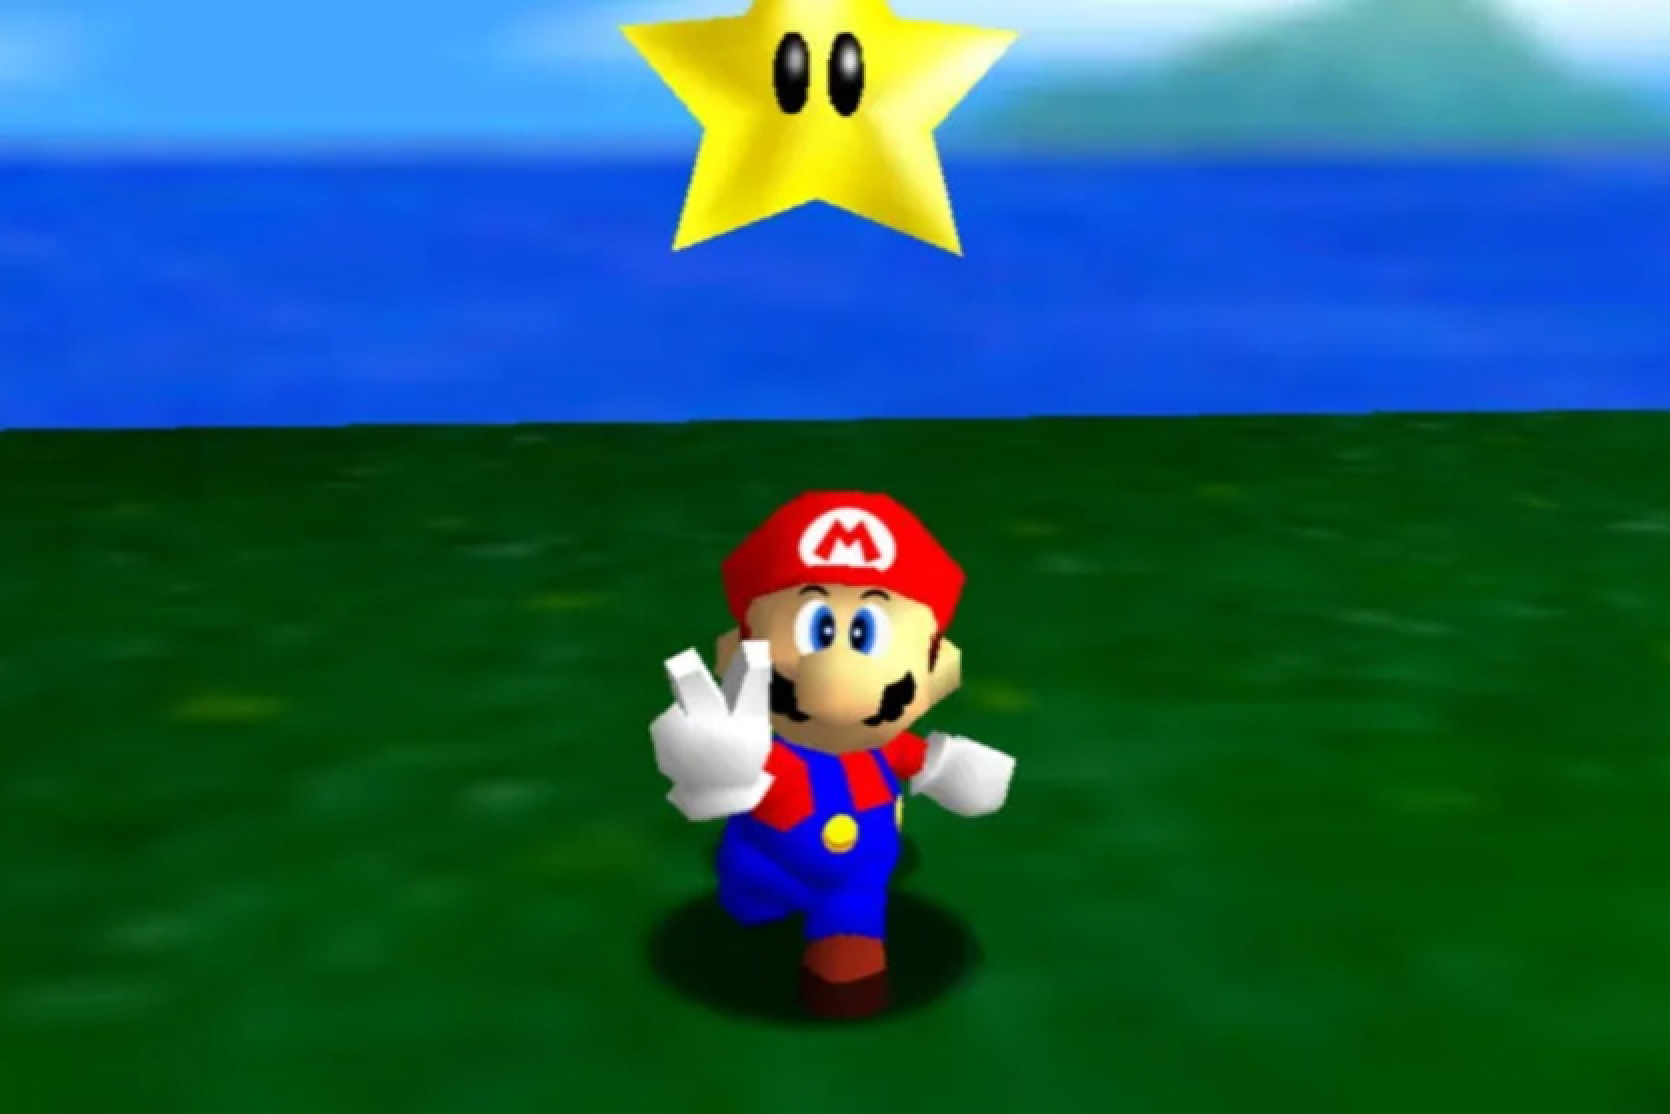 Super Mario 64 went by without pressing the A button to jump - this was considered absolutely impossible